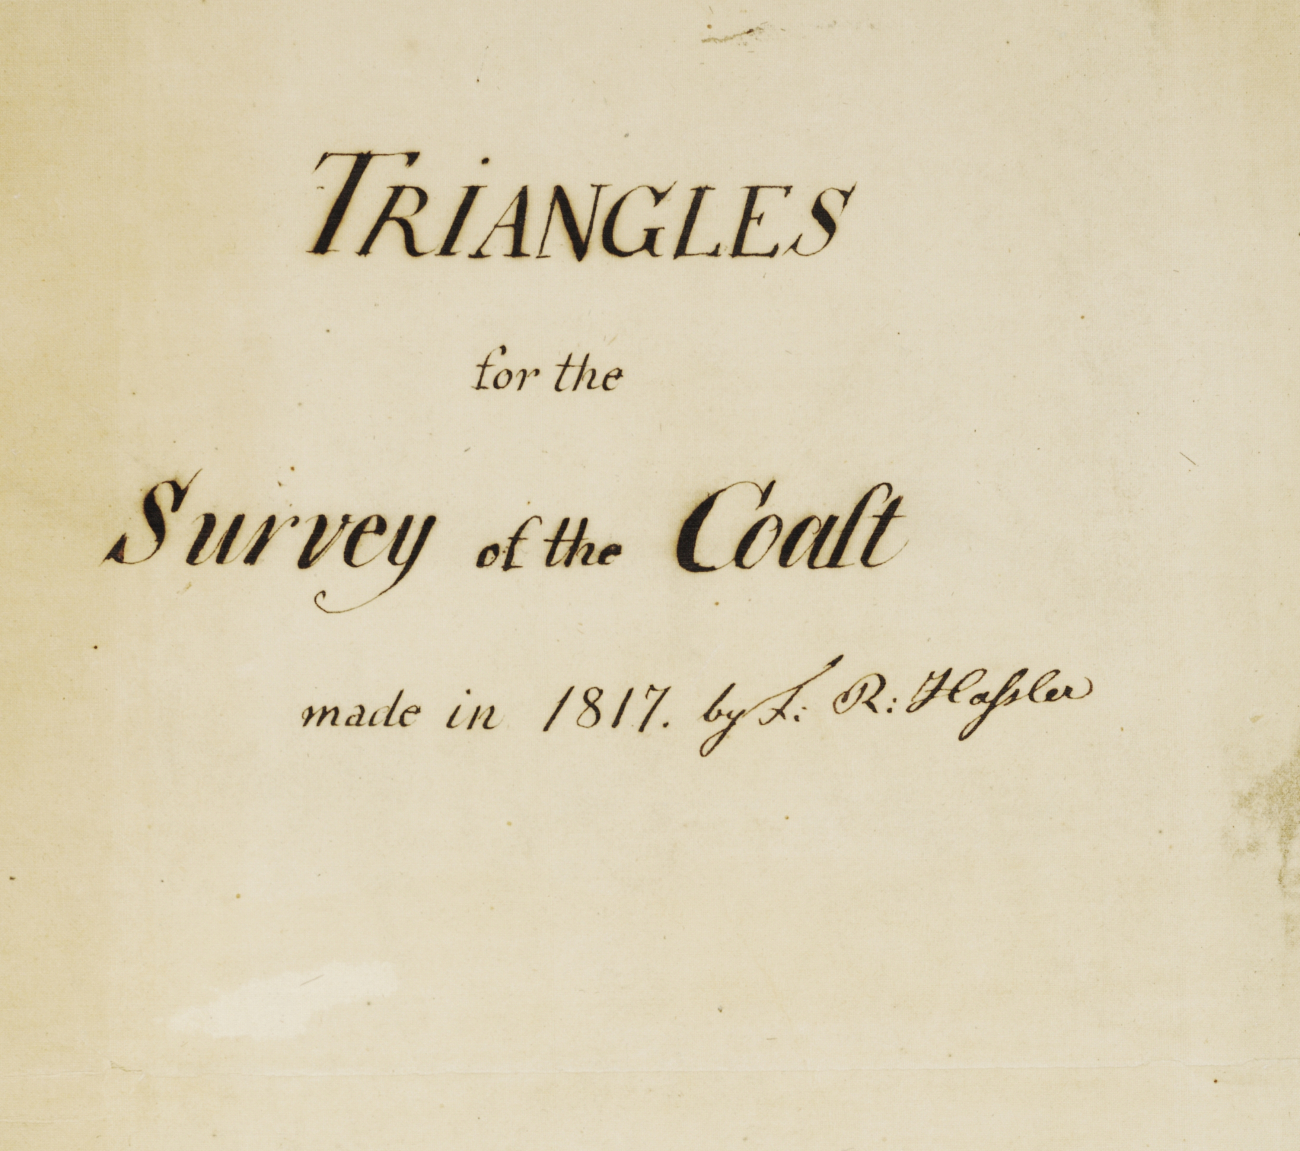 Title page  of computation book of ' Triangles for the Survey of theCoast' made in 1817 by F